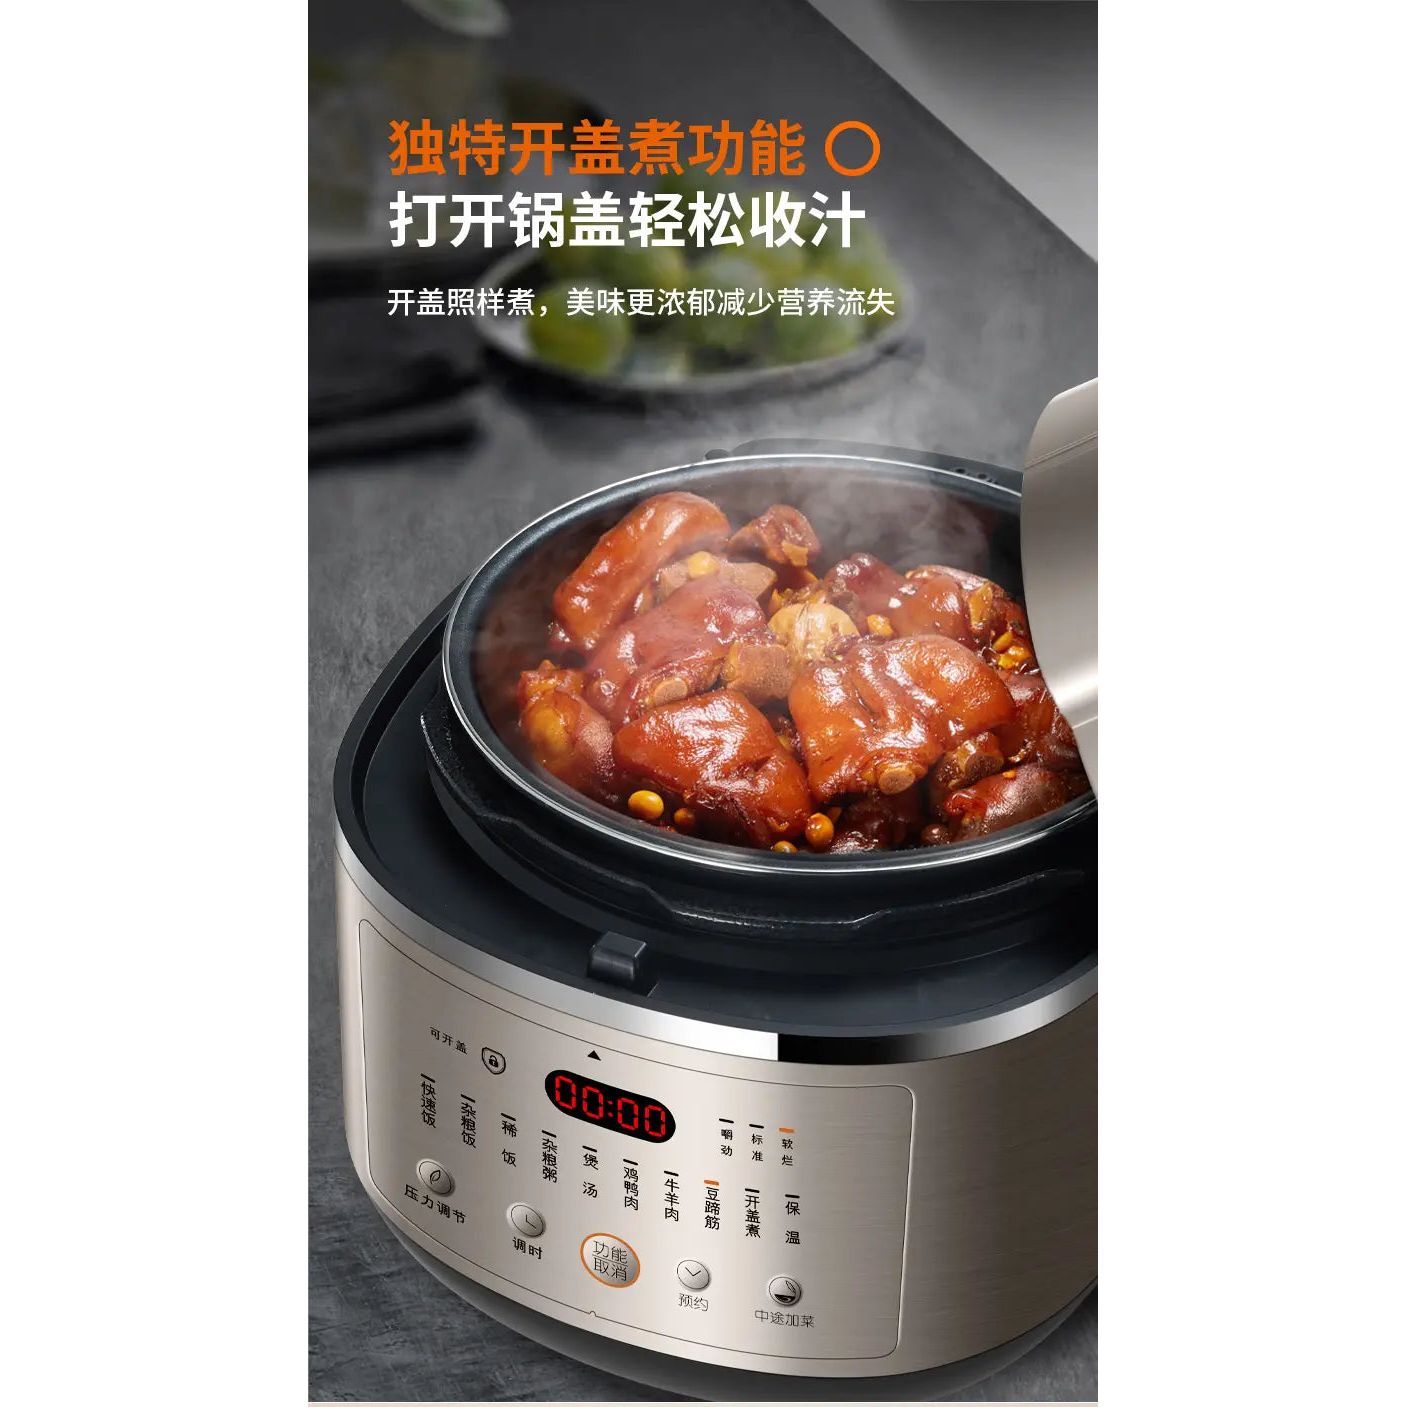 Joyoung Smart Electric Pressure Cooker Y-50IHS99